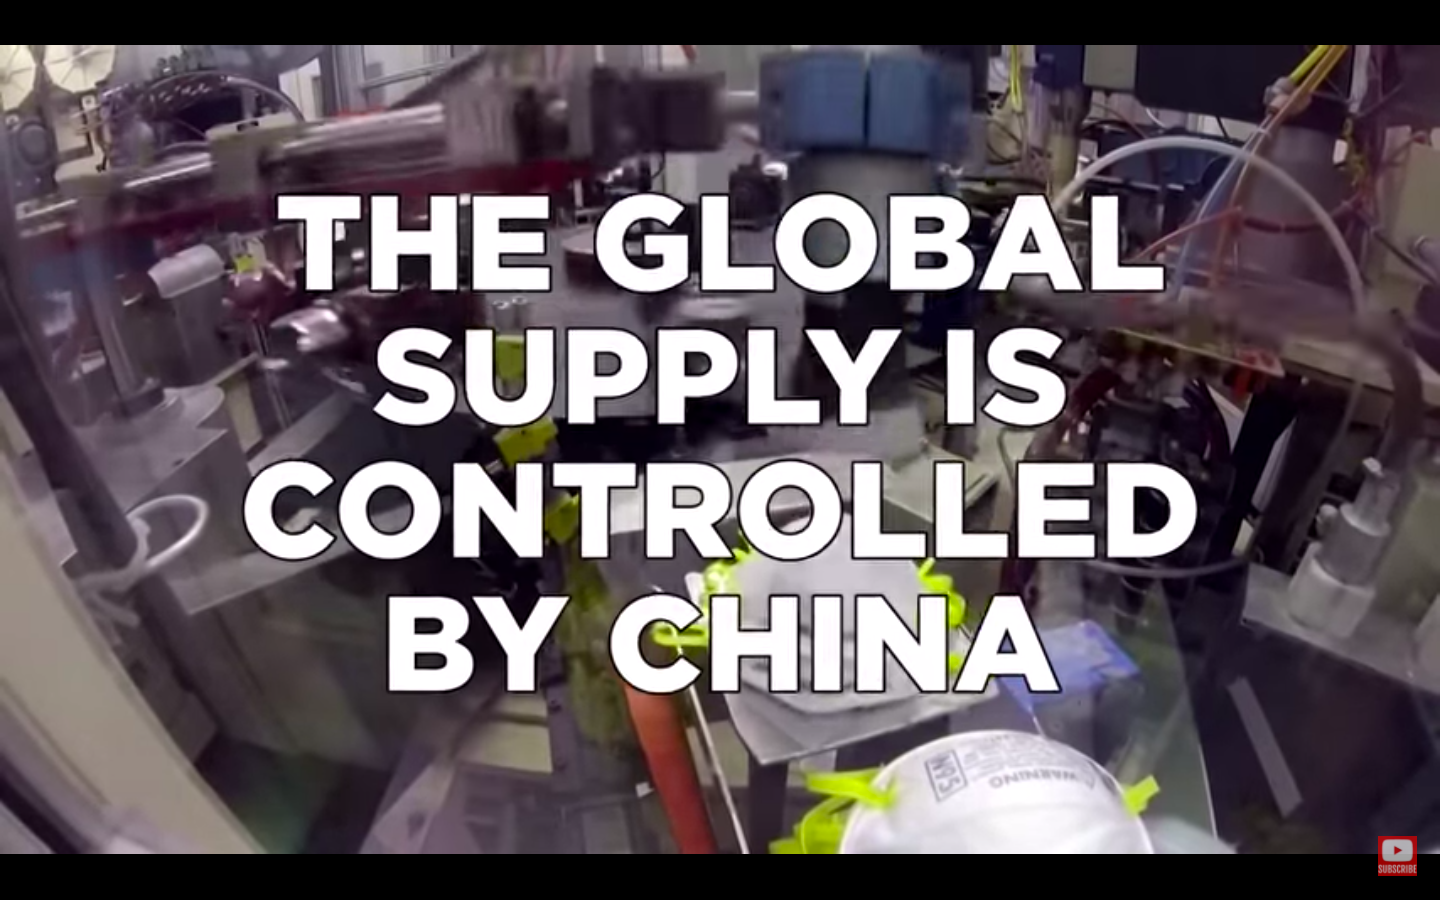 VIDEO: China Is Hoarding The World’s Medical Supplies